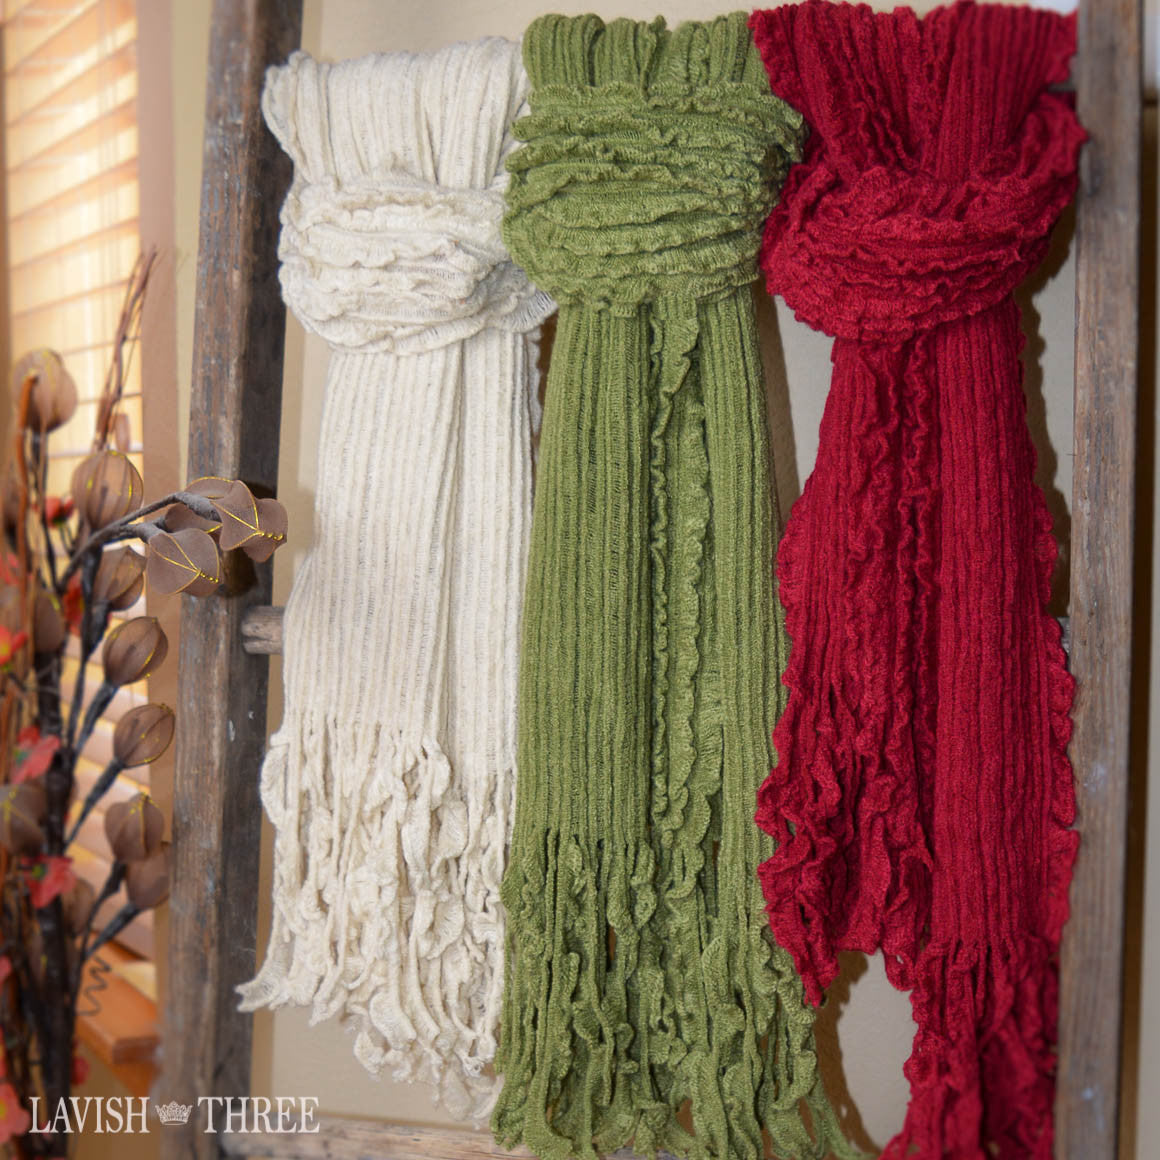 Warm ruffled scarves in ivory, sage green, cranberry